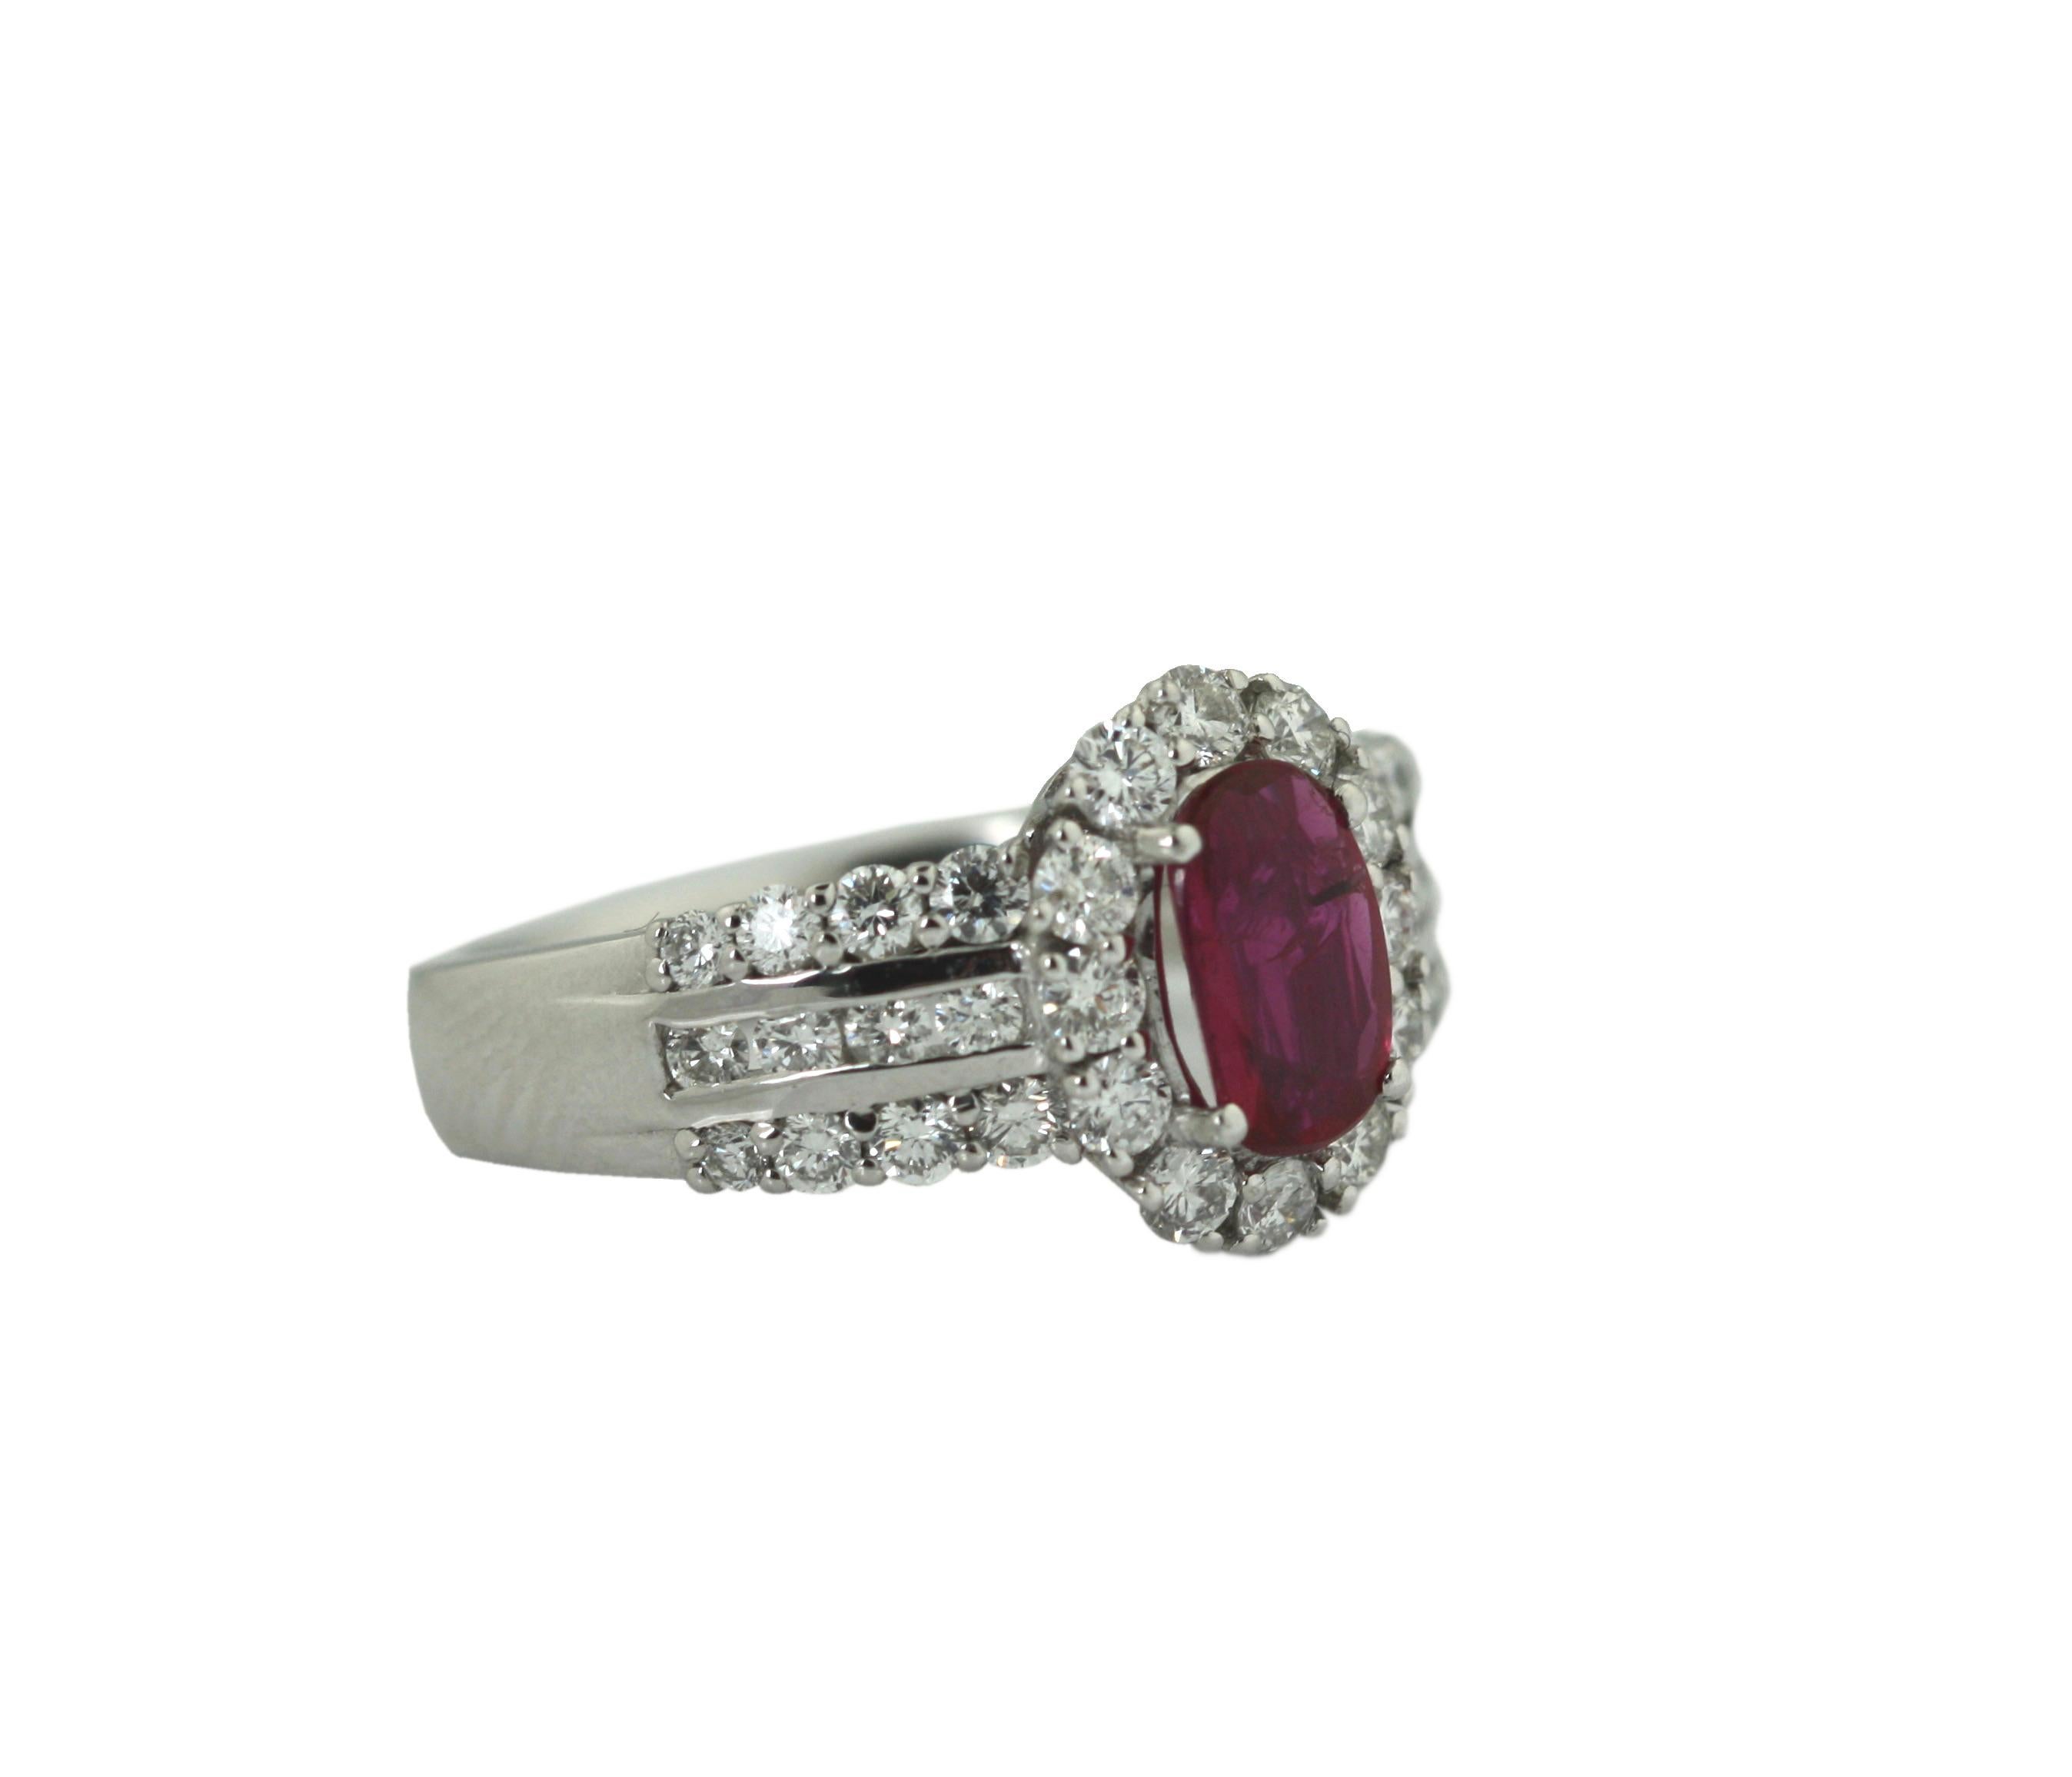 
Platinum, Ruby and Diamond Ring
Prong-set with a cushion-shaped ruby weighing 1.00 carats, framed by round diamonds, size 7.
﻿Accompanied by GIA report no. 6204910402, stating that the ruby has no indications of heating.
Accompanied with 
AIG